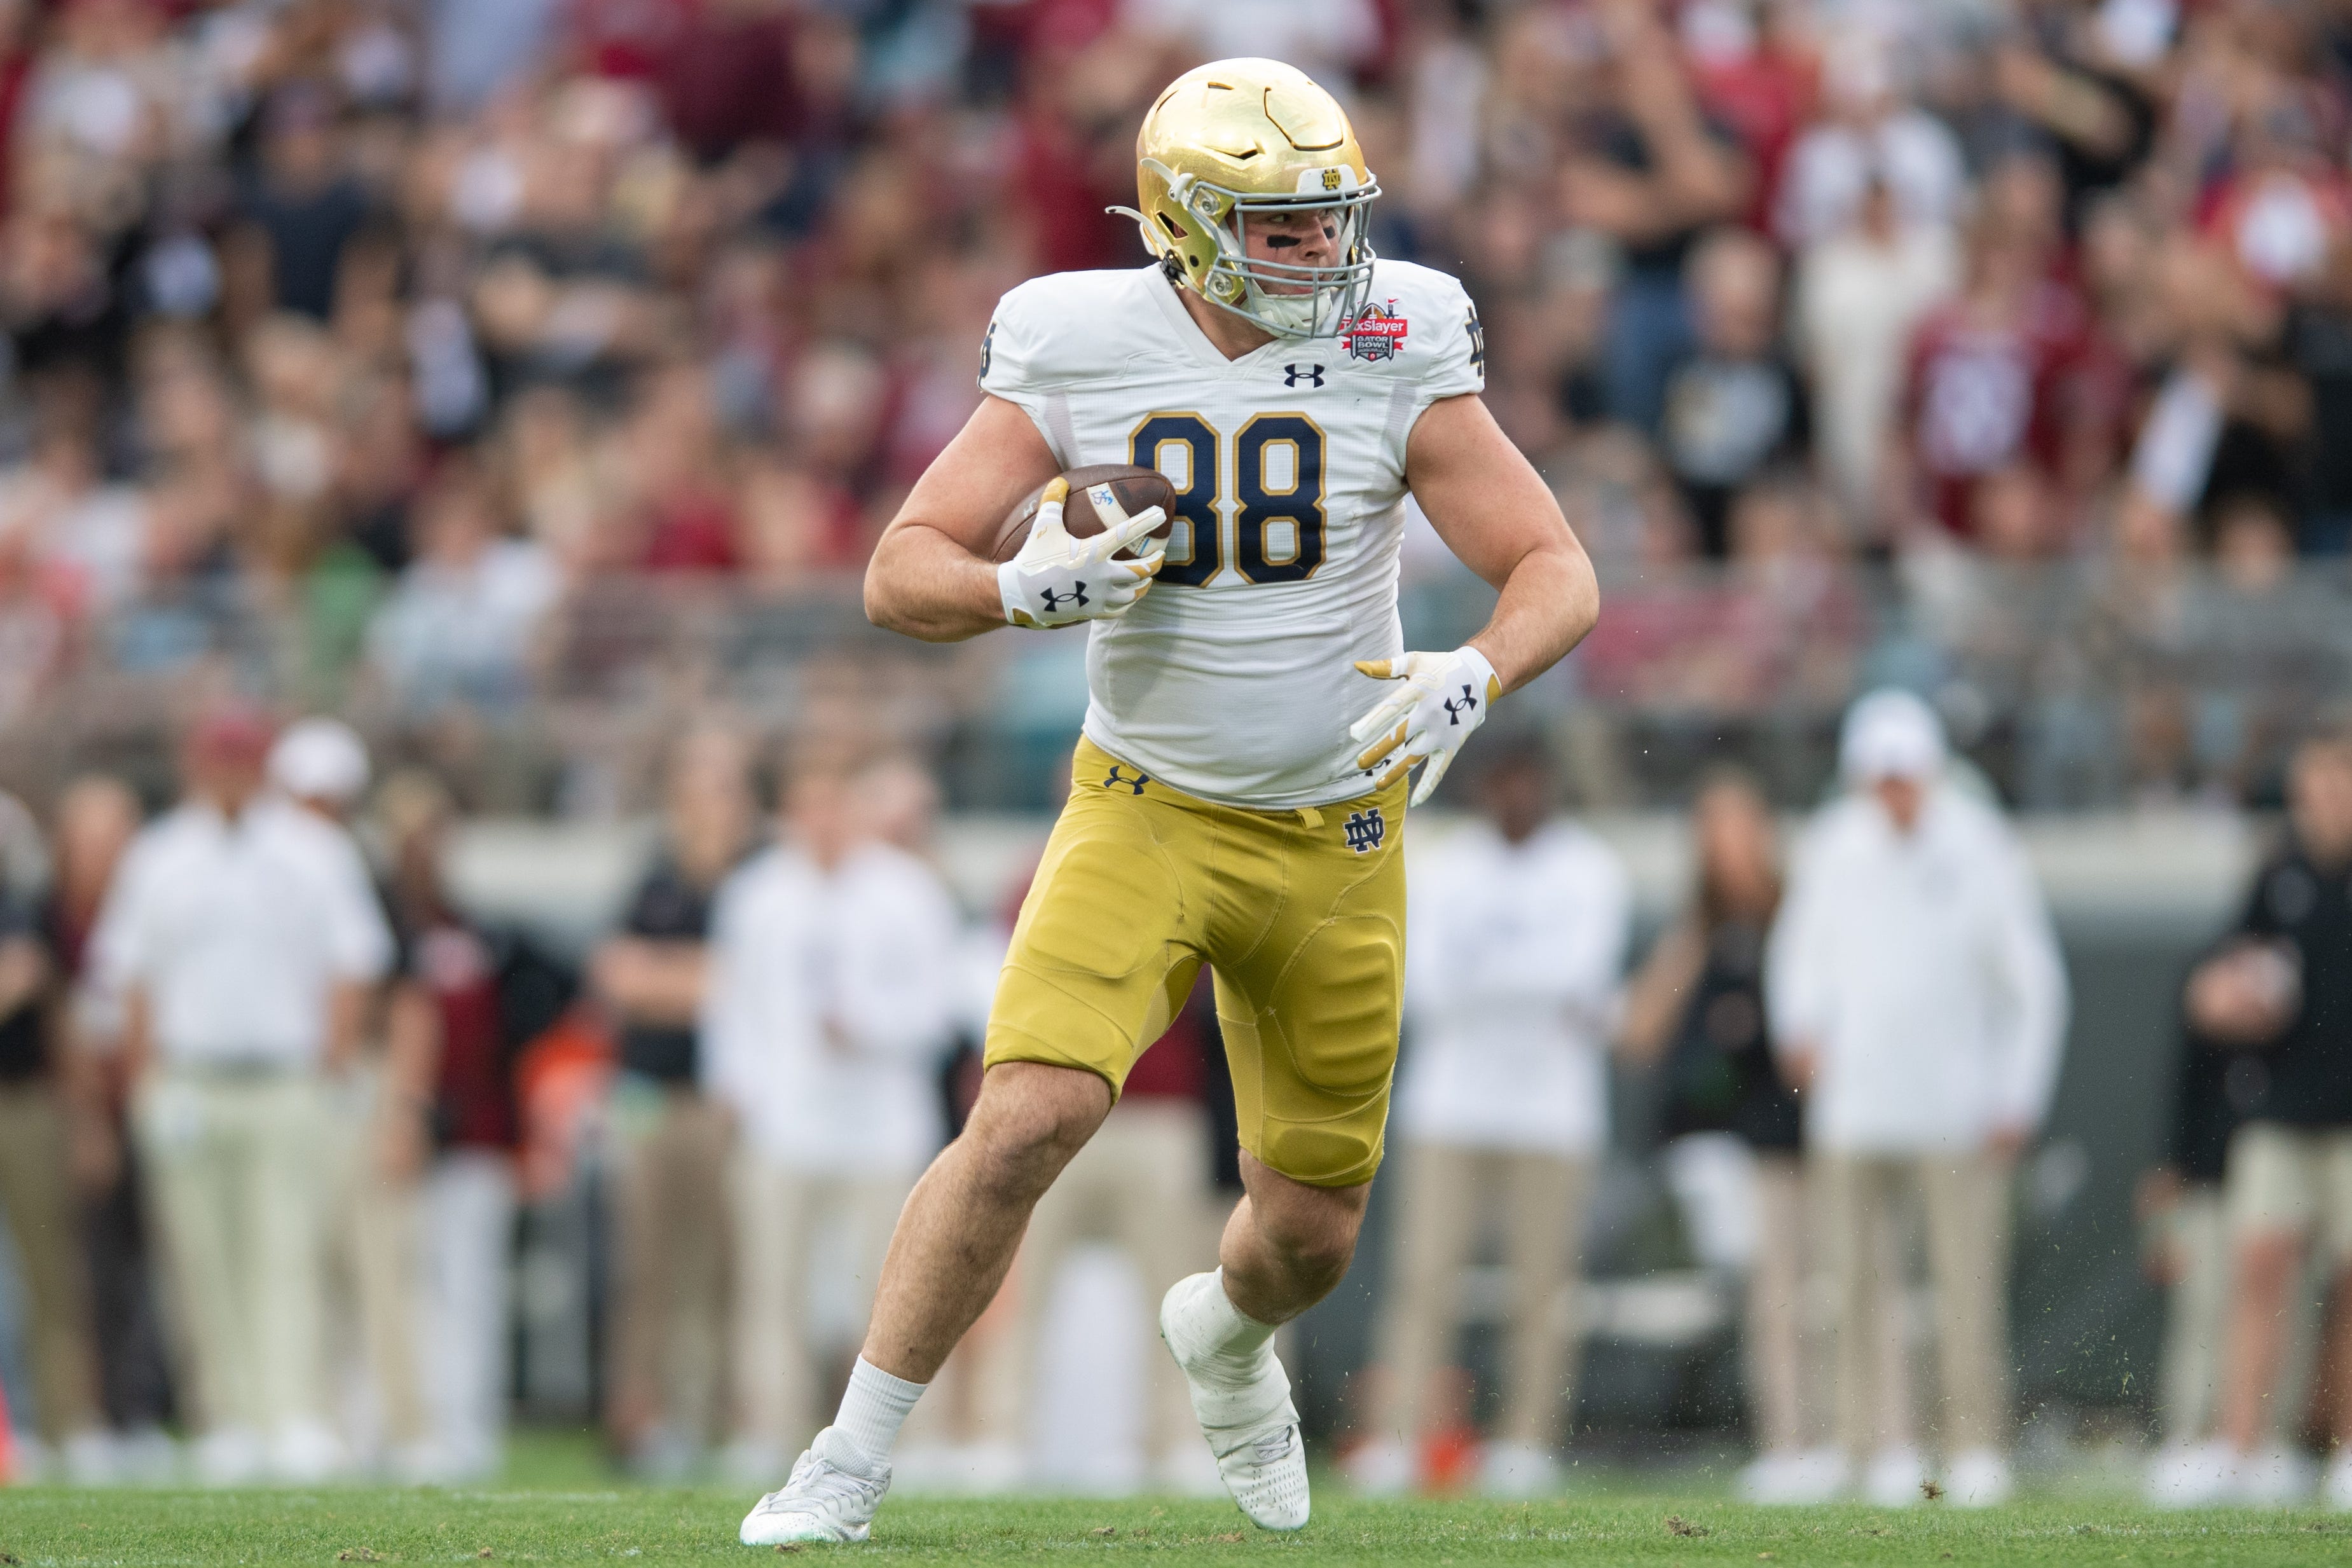 Dec 30, 2022; Jacksonville, FL, USA; Notre Dame Fighting Irish tight end Mitchell Evans (88) runs the ball after the catch against the South Carolina Gamecocks in the first quarter in the 2022 Gator Bowl at TIAA Bank Field. Mandatory Credit: Jeremy Reper-USA TODAY Sports